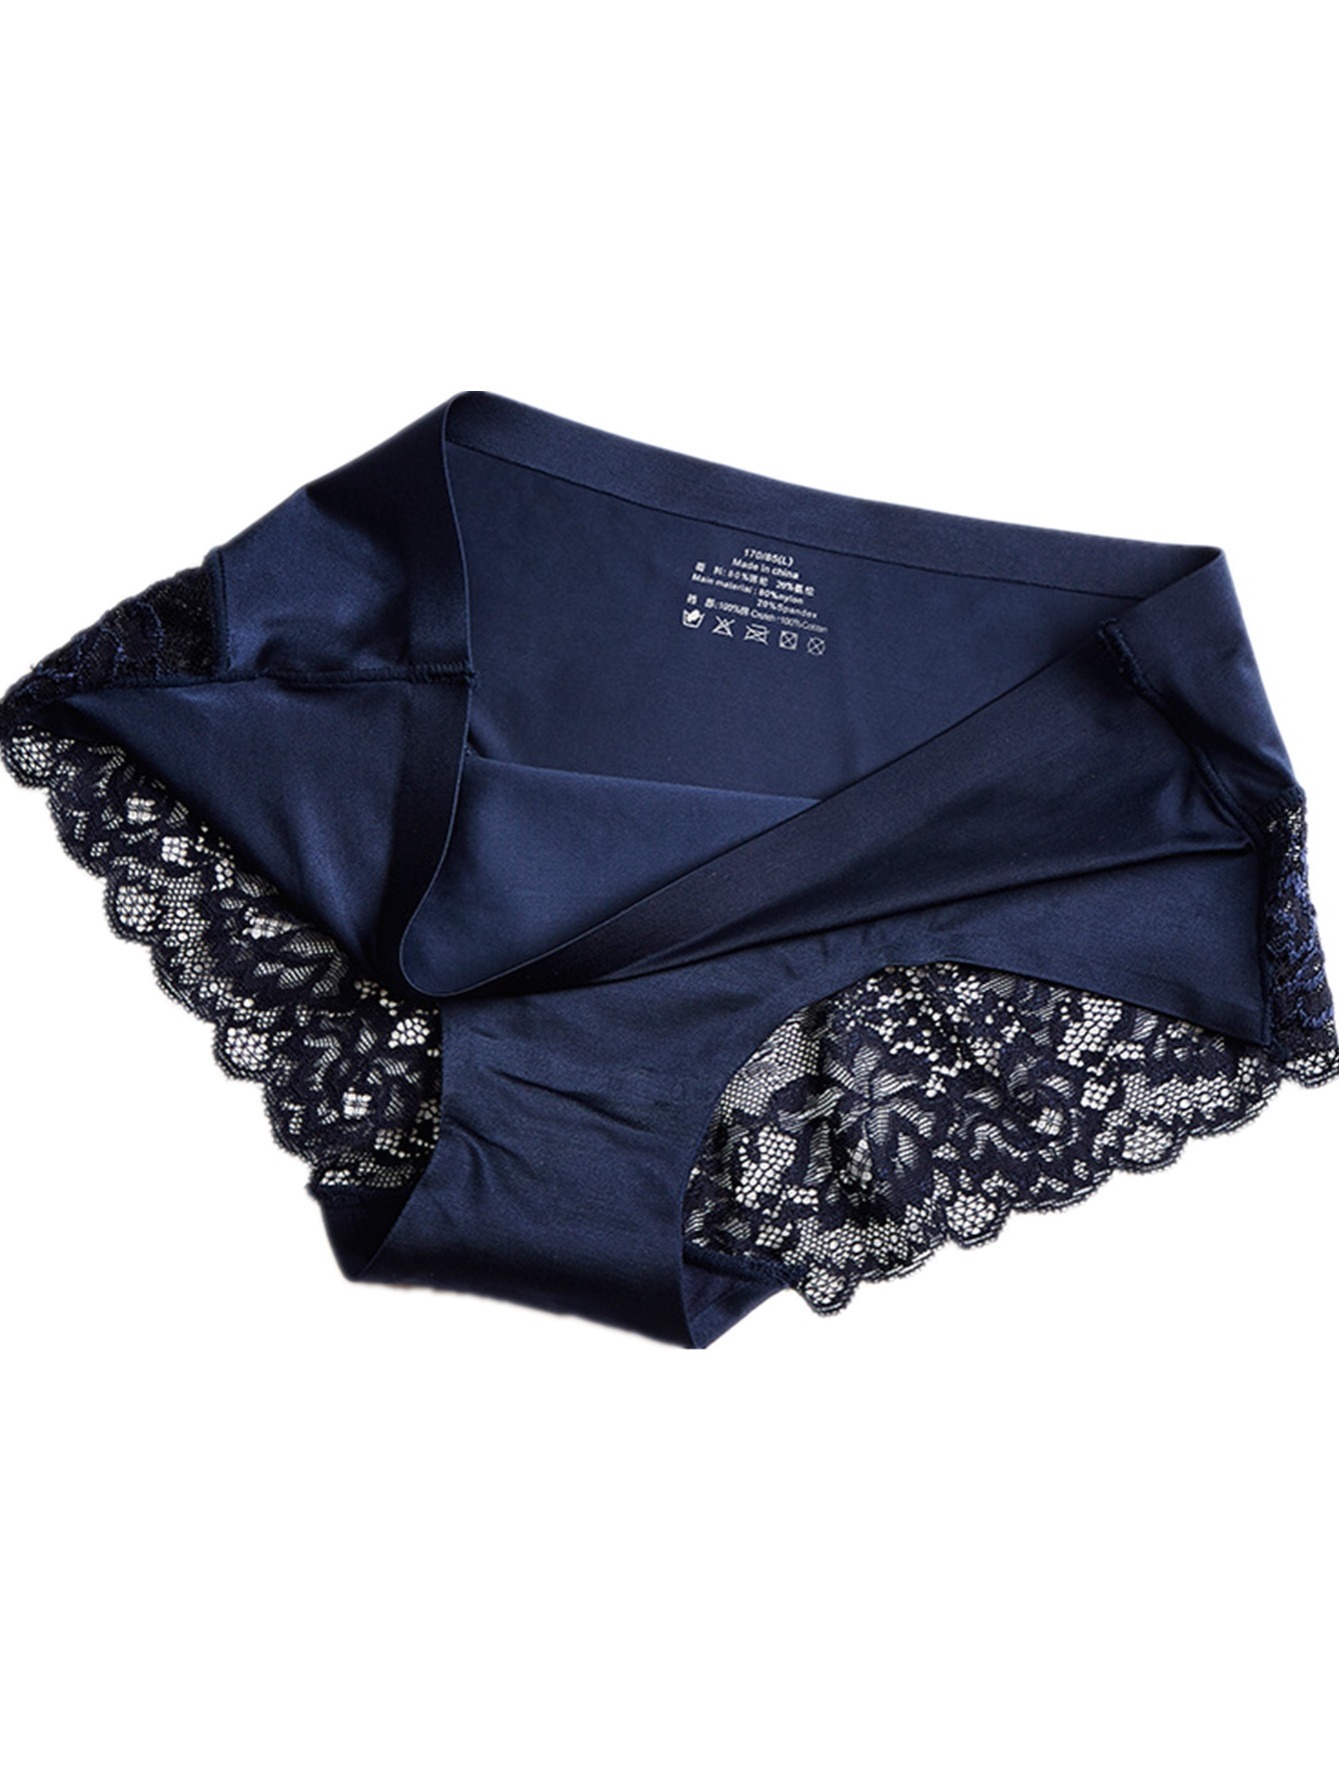 Secret Leaves dark blue satin lace and tulle thong - Yamamay